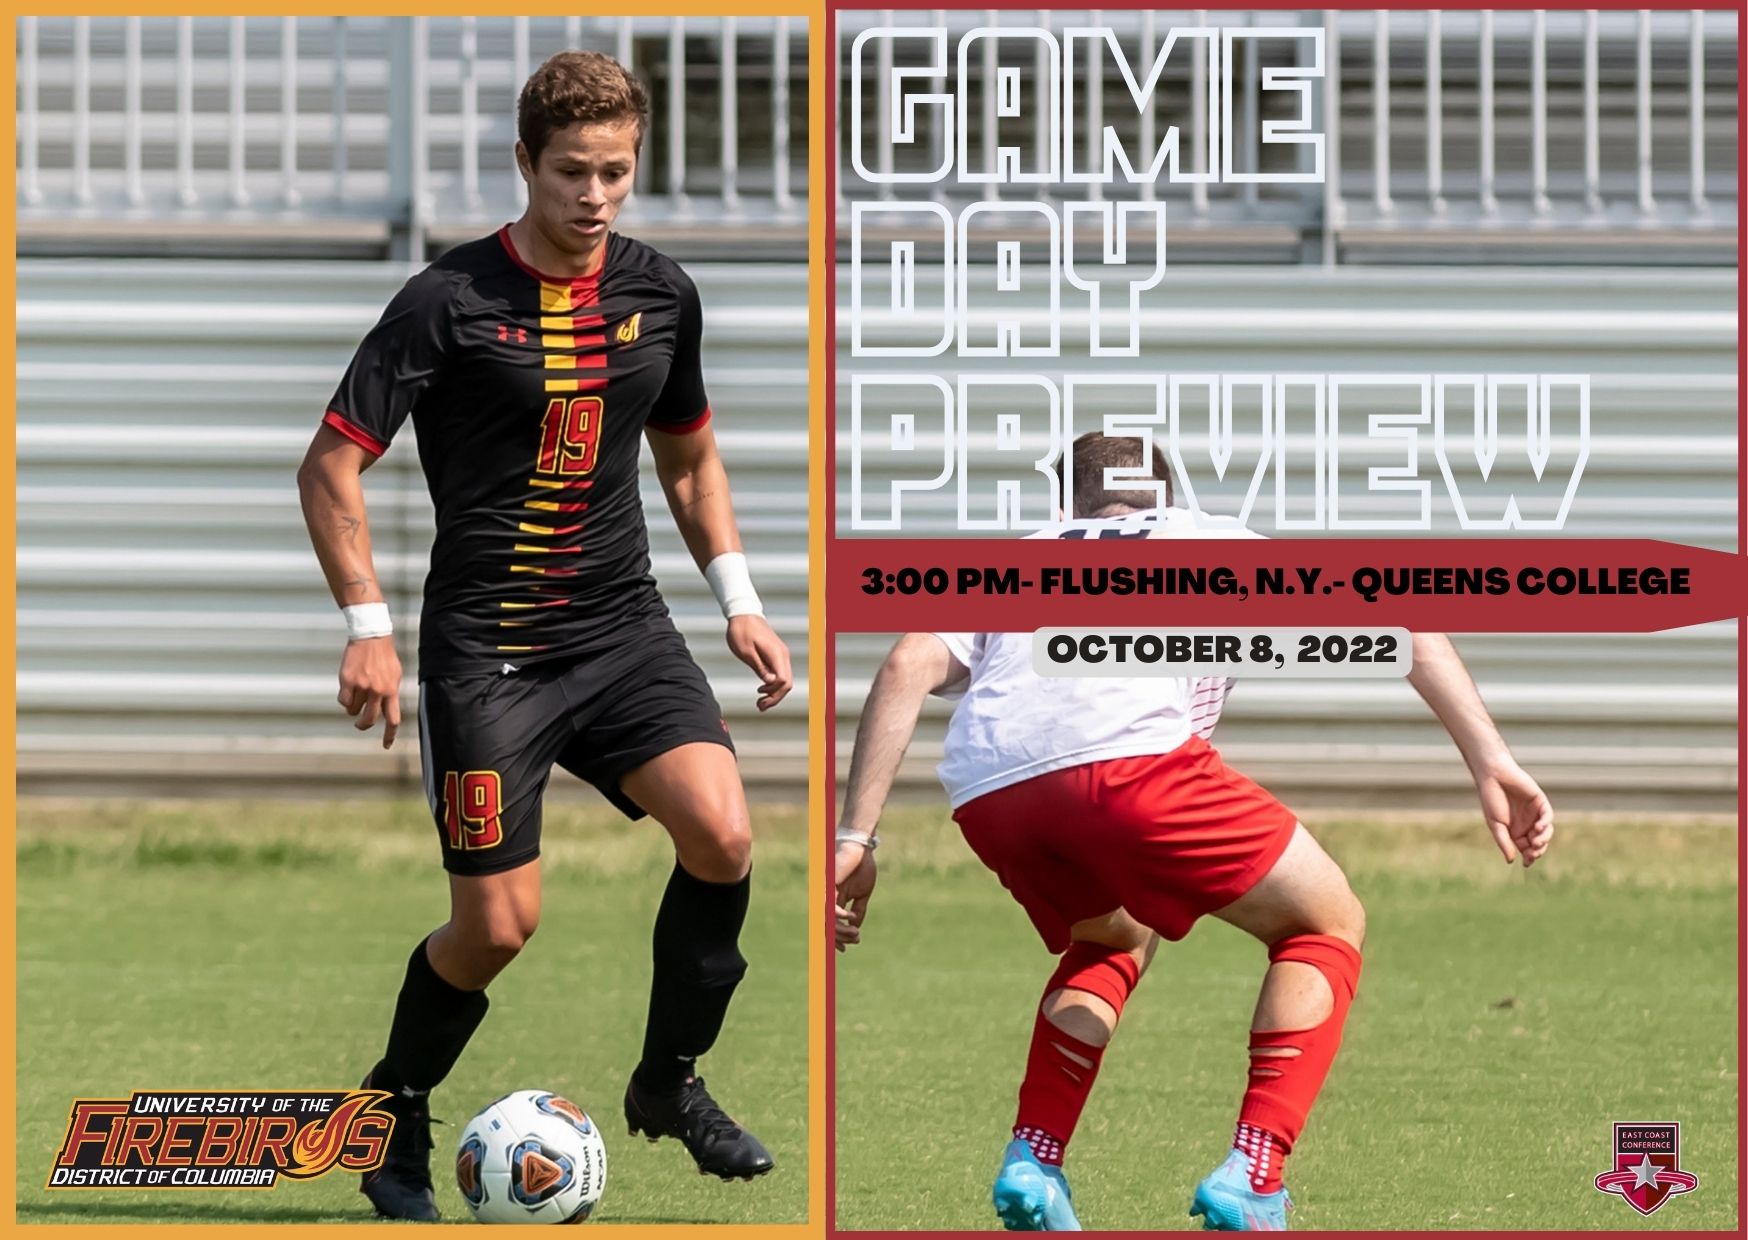 MEN'S SOCCER: GAME DAY PREVIEW 10/8